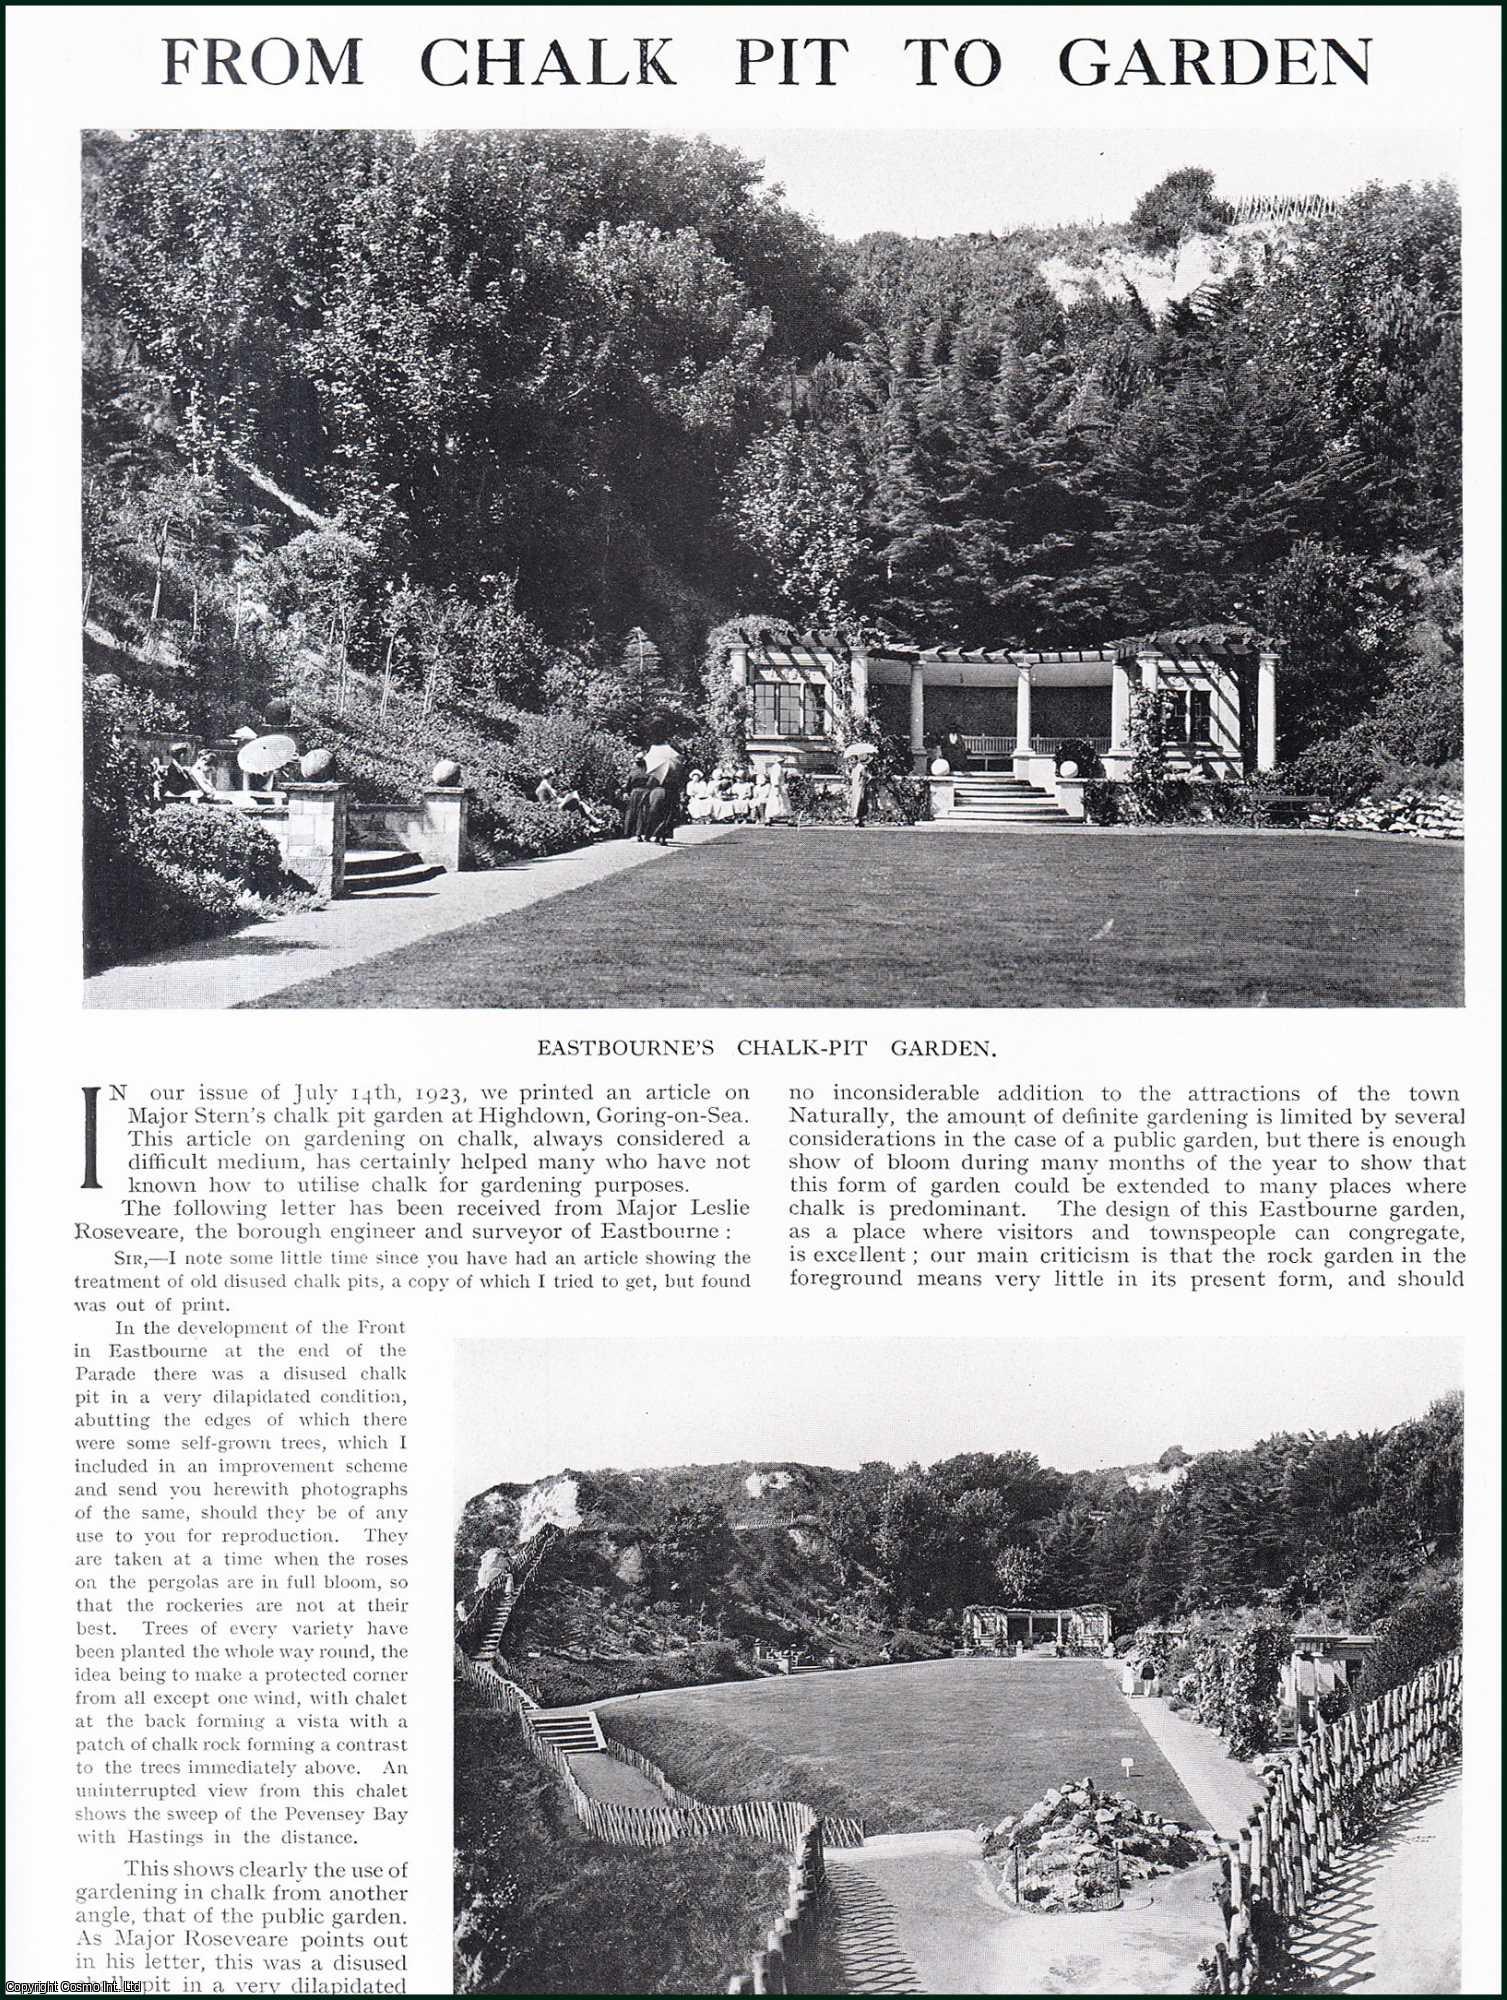 E.H.M. Cox - From Chalk Pit to Garden : Eastbourne. Several pictures and accompanying text, removed from an original issue of Country Life Magazine, 1925.